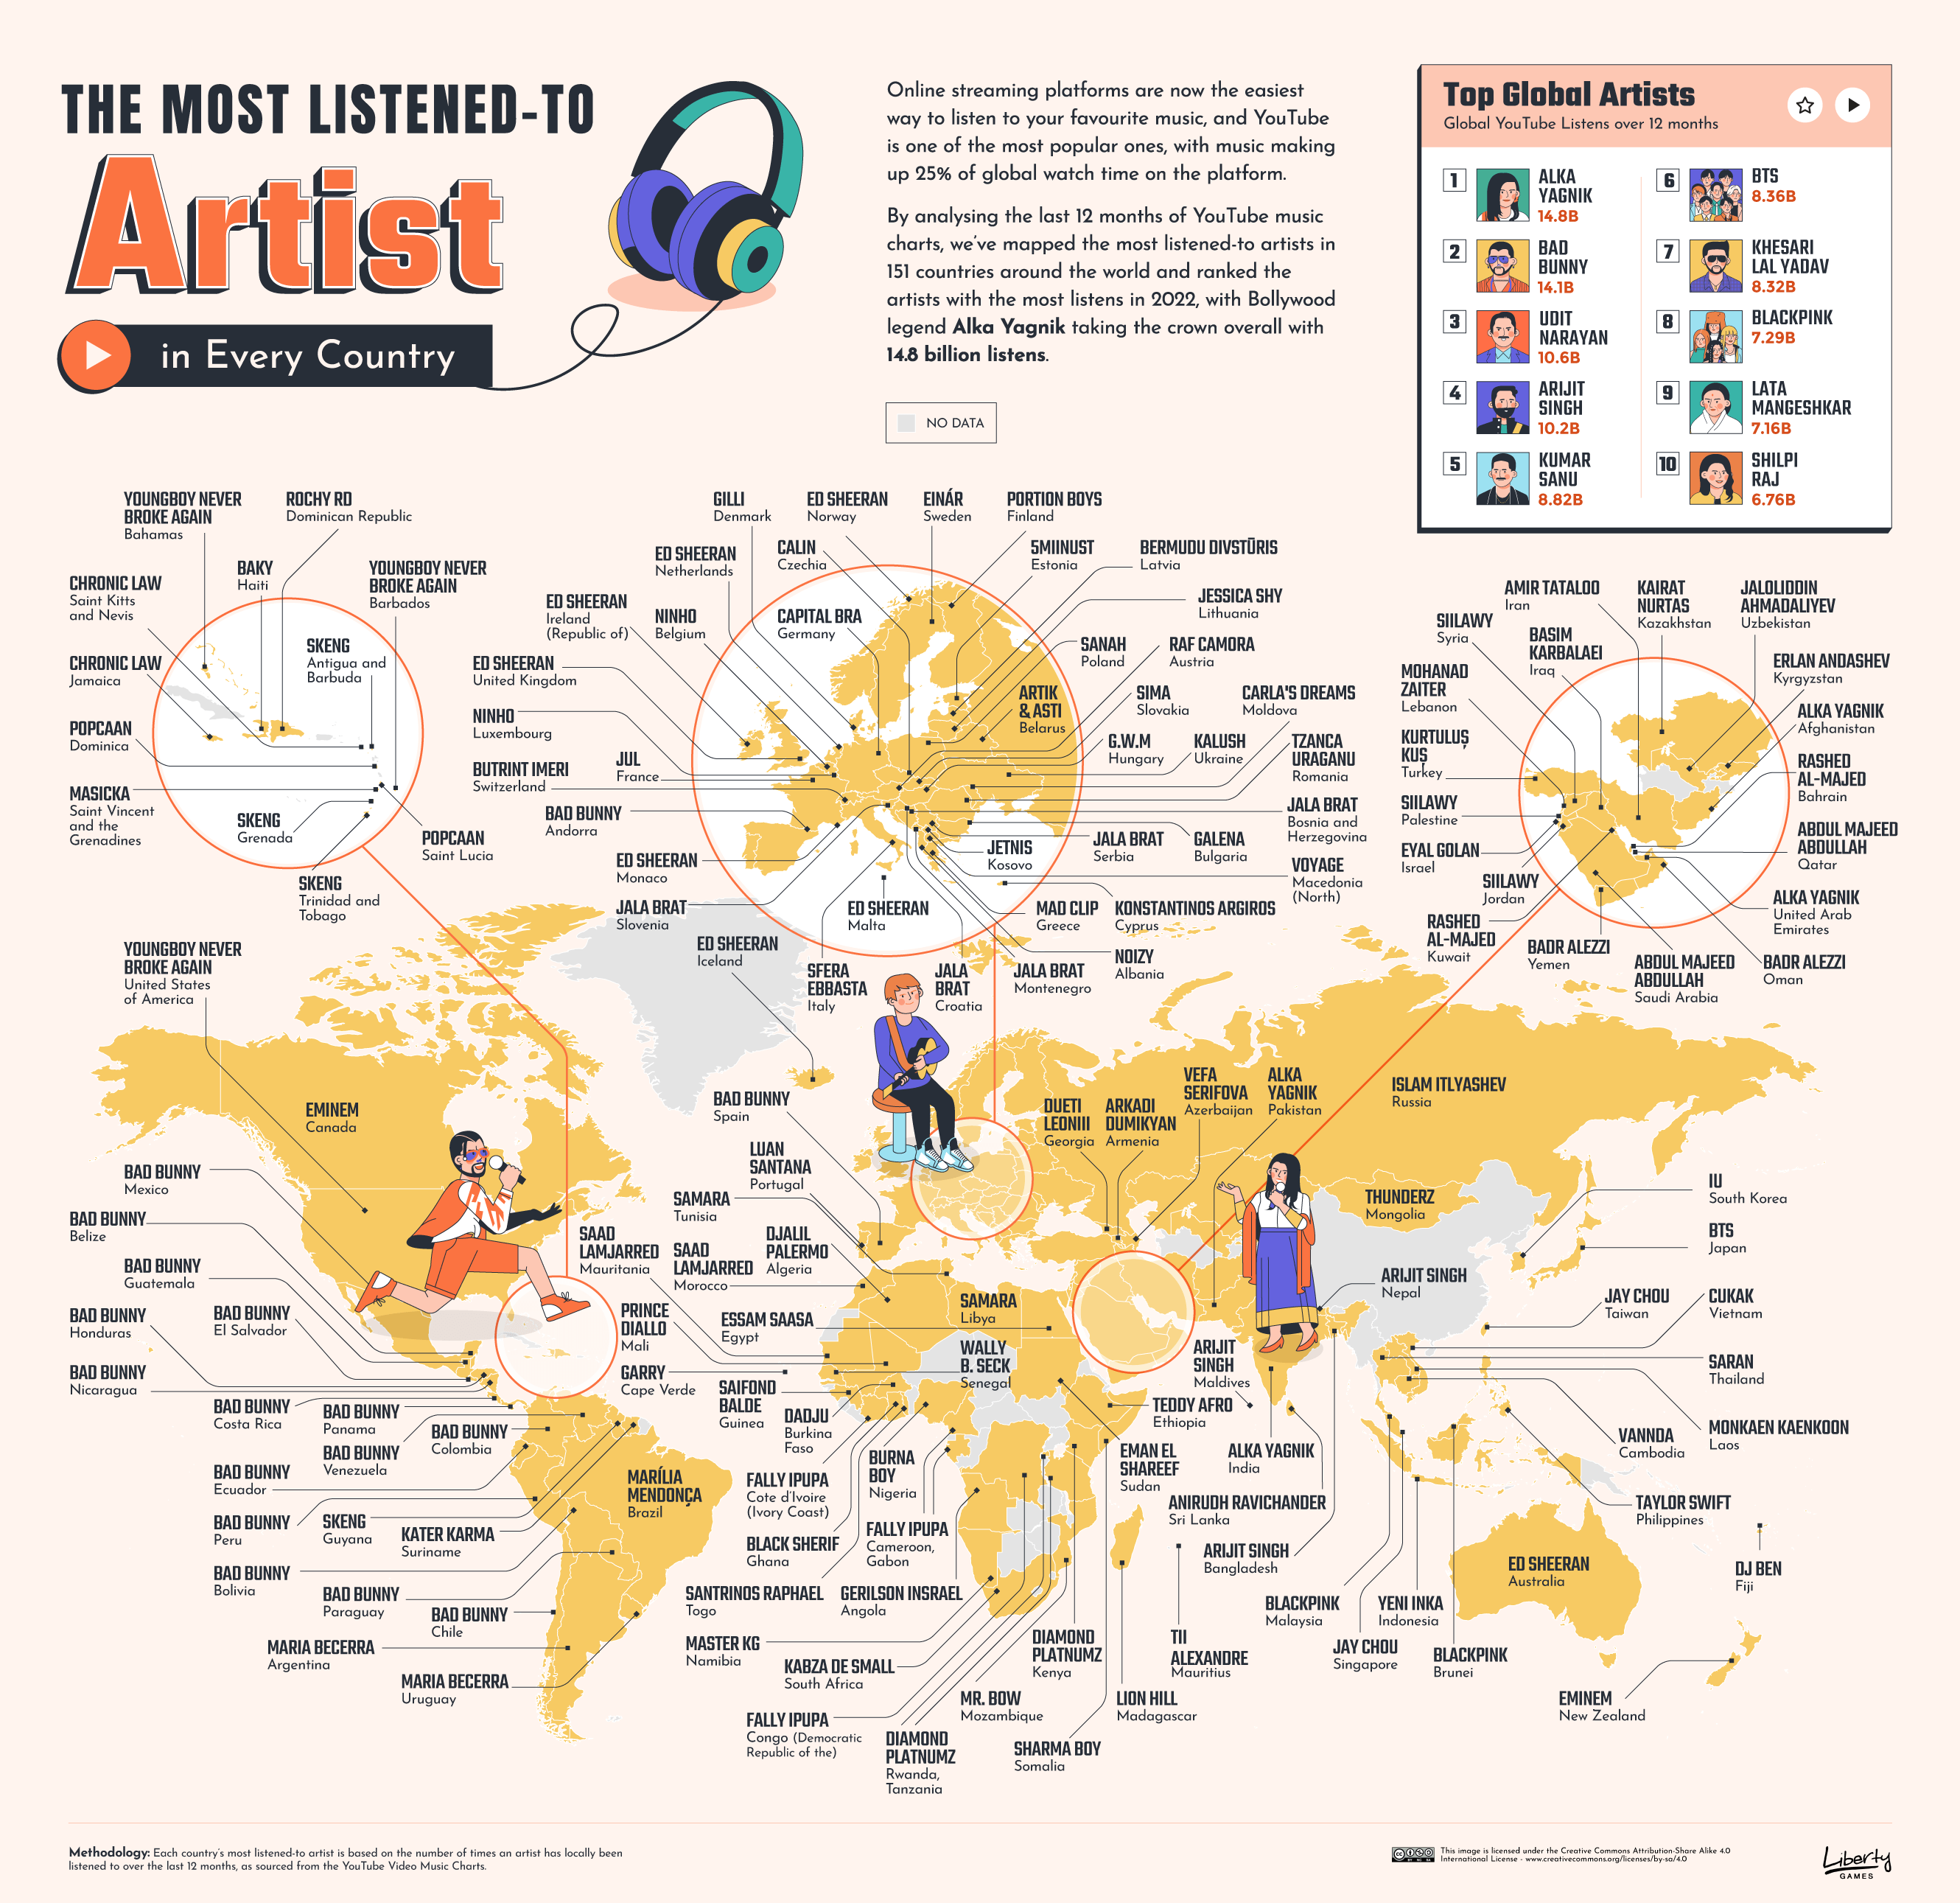 The most listened to artists in the world map